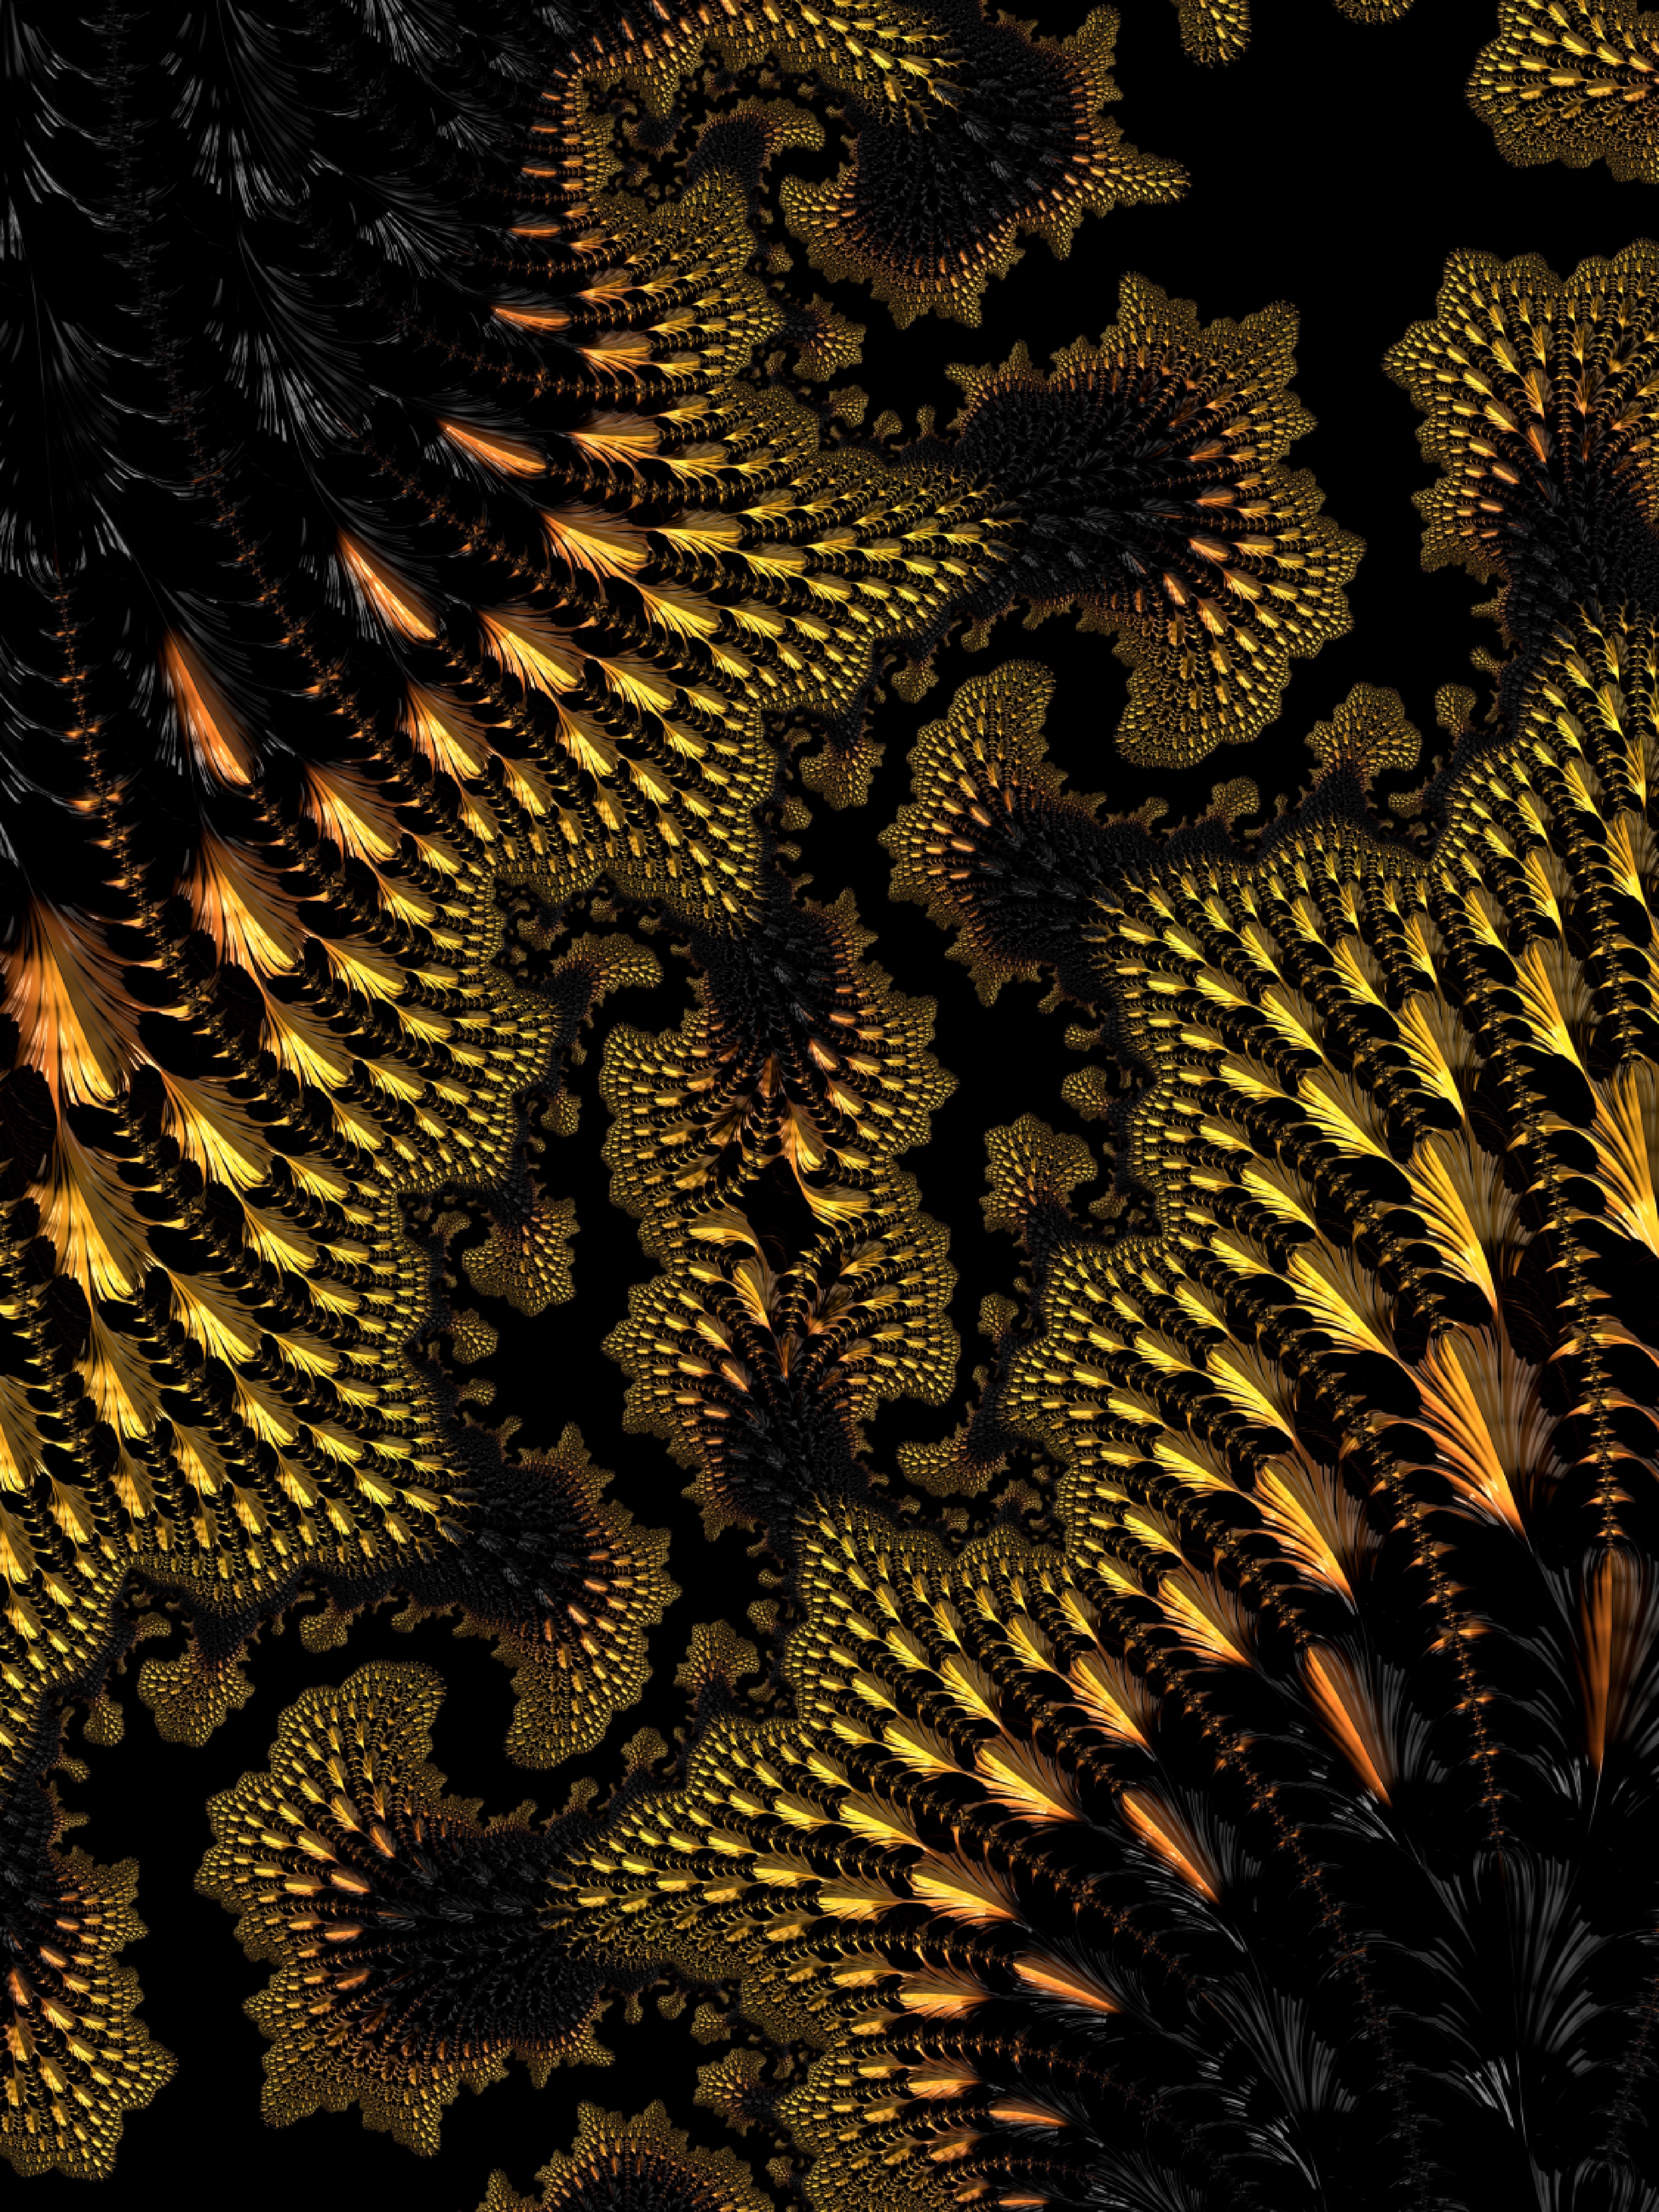 fractal, ornate, 3d, abstract, black, yellow, winding, sinuous